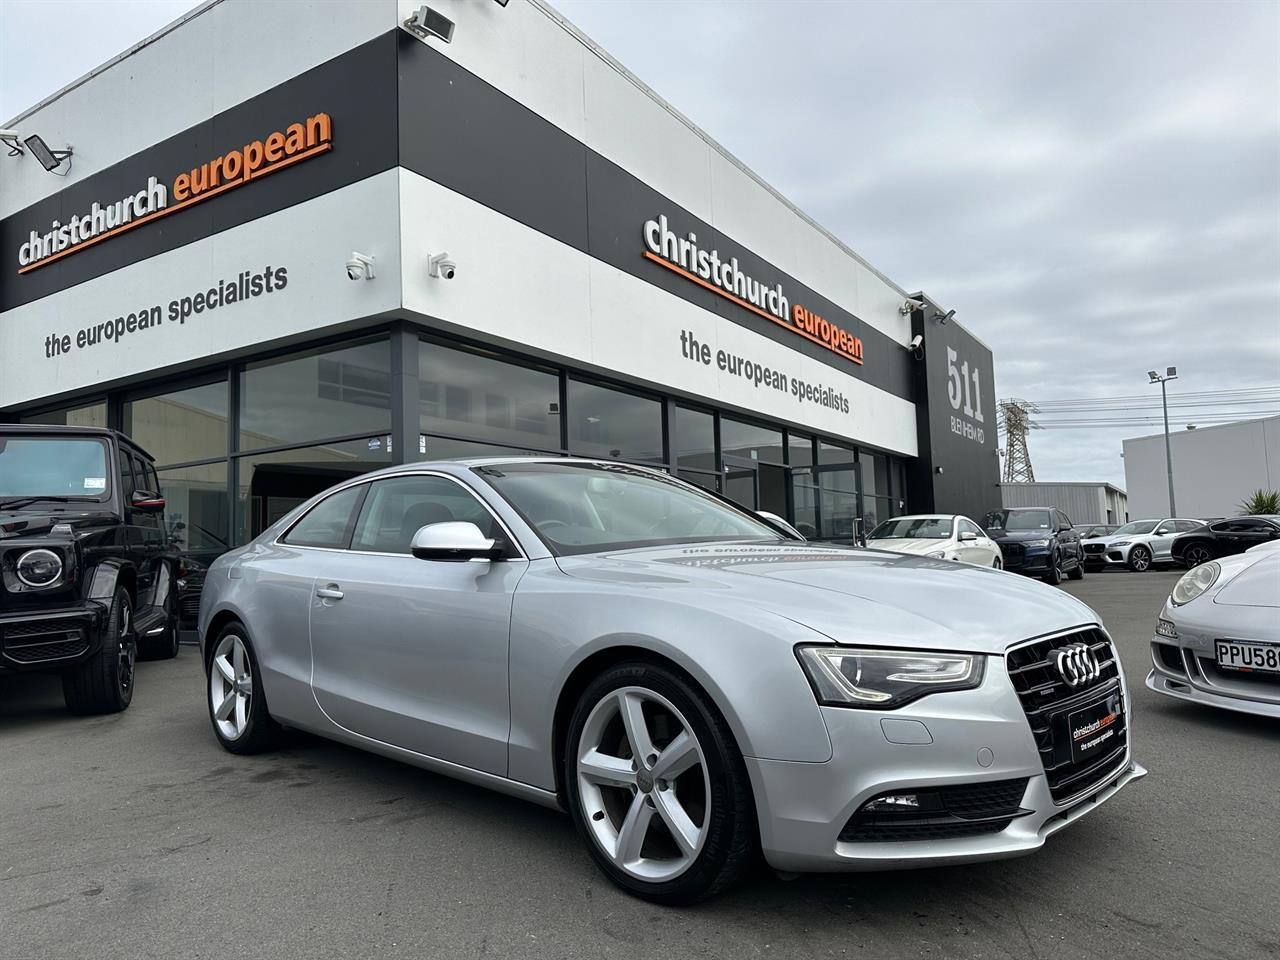 image-0, 2012 Audi A5 2.0 TFSI Quattro Facelift Coupe at Christchurch